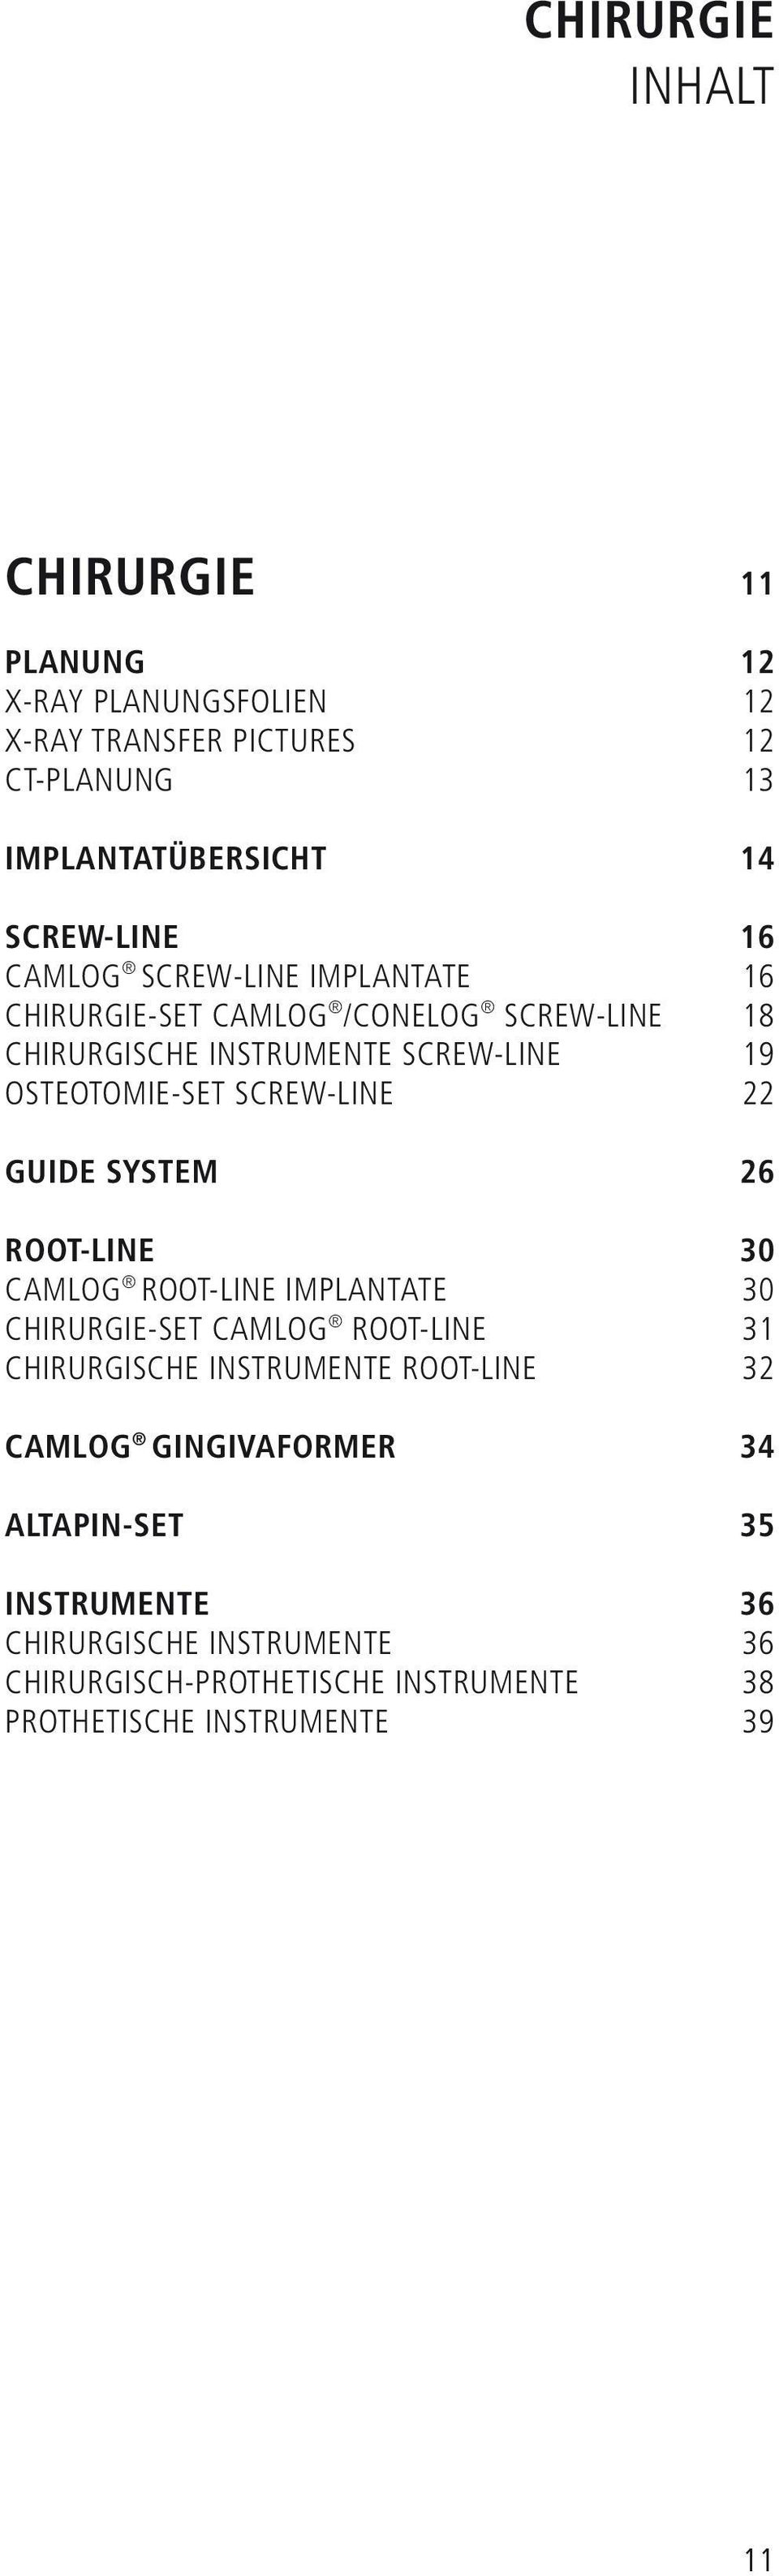 22 GUIDE SYSTEM 26 ROOT-LINE 30 CAMLOG ROOT-LINE IMPLANTATE 30 CHIRURGIE-SET CAMLOG ROOT-LINE 31 CHIRURGISCHE INSTRUMENTE ROOT-LINE 32 CAMLOG